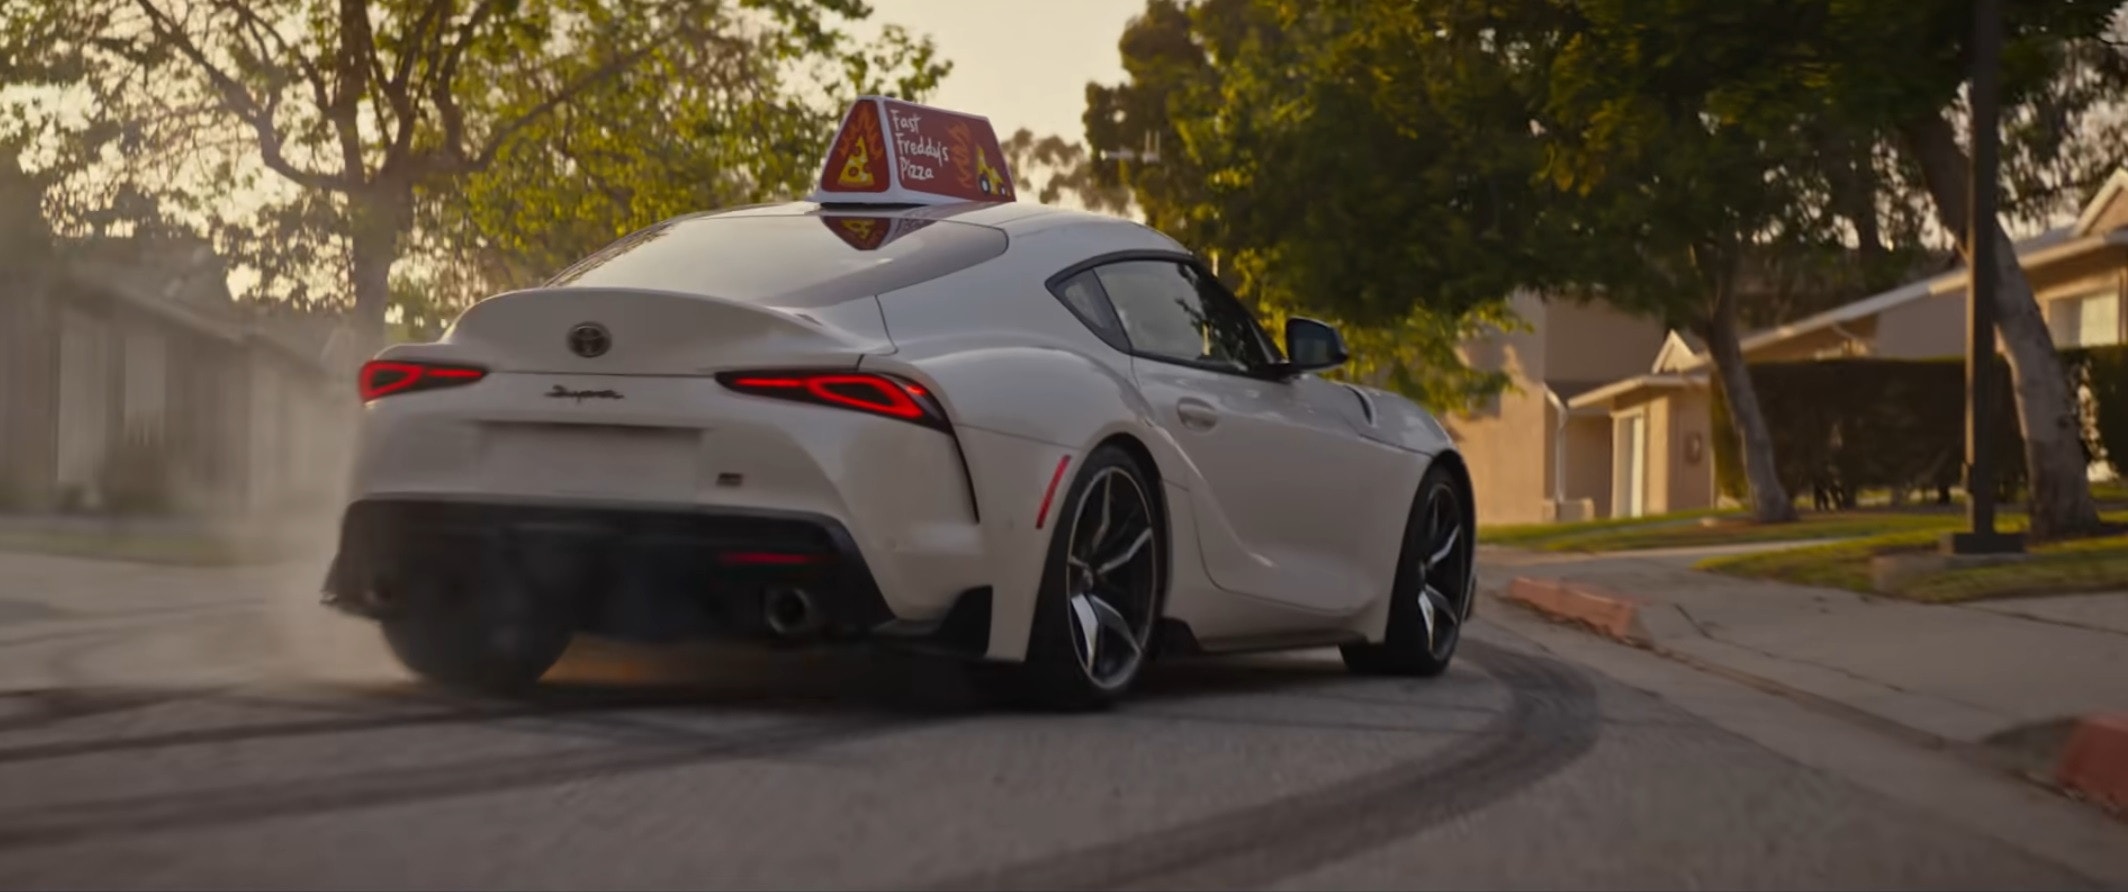 2022 GR Supra U.S. Commercial Is a Tale of Haze and Shopping autoevolution